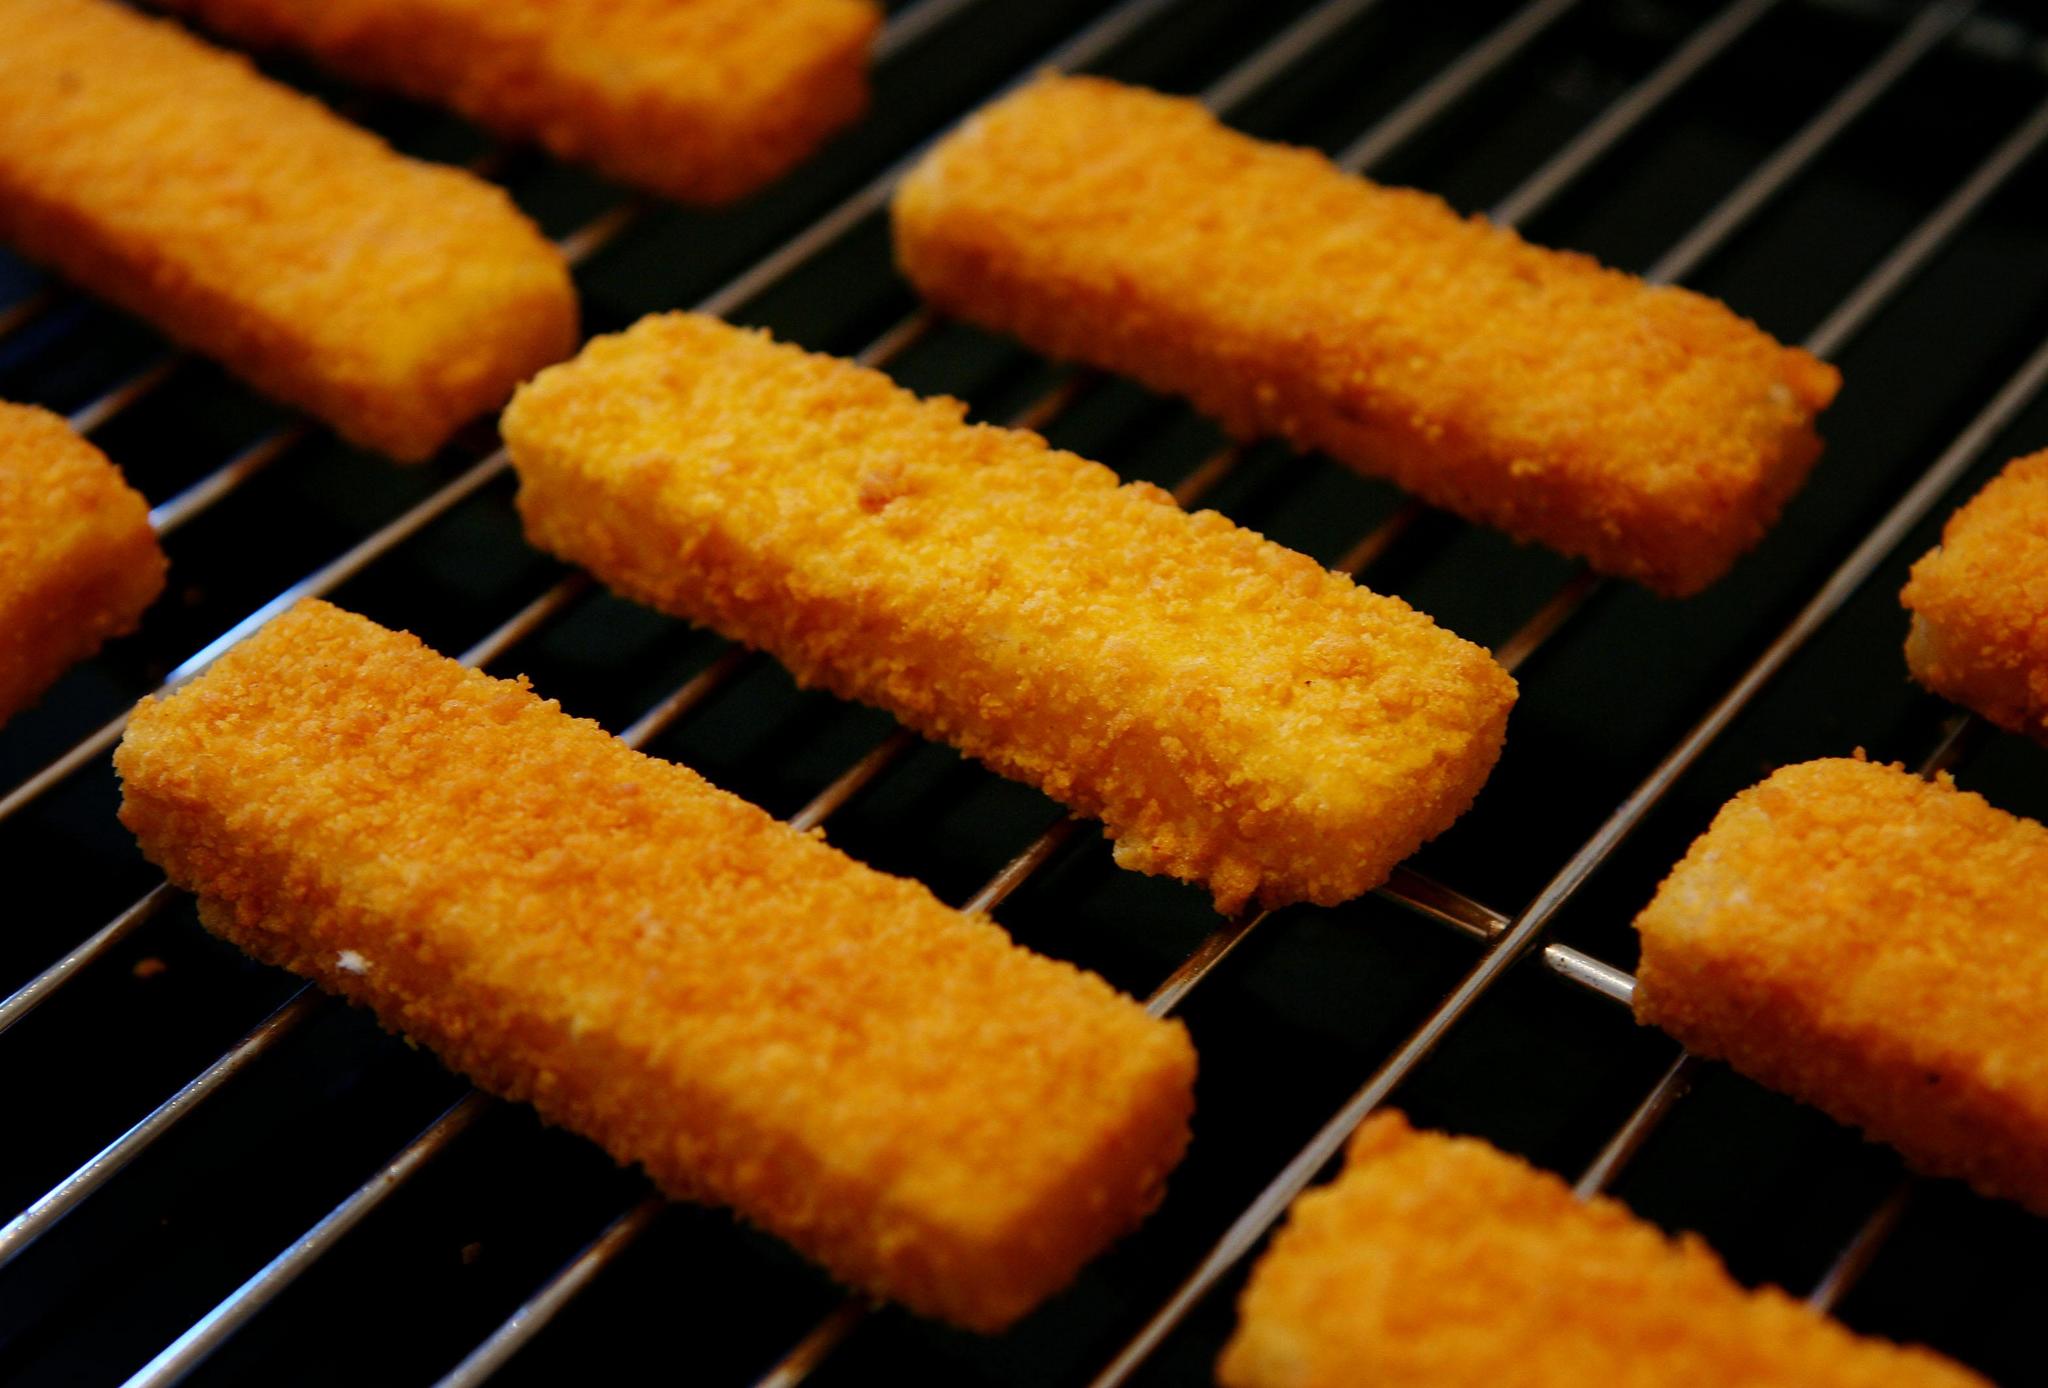 Birdseye Fish Fingers ready to go under the grill as the Birdseye factory in Hull prepares for closure.  PRESS ASSOCIATION Photo. Photo date: Thursday January 11, 2007. A Birds Eye frozen food factory is to close later this year with the loss of hundreds of jobs and production moved to Germany, shocked workers were told today. The GMB union said production was halted at the Hull plant this morning and workers were given the grim news. According to the union, 600 jobs will be lost, although the company said the announcement involved around 490 redundancies. See PA story INDUSTRY Jobs. Photo credit should read: Gareth Fuller/PA Wire